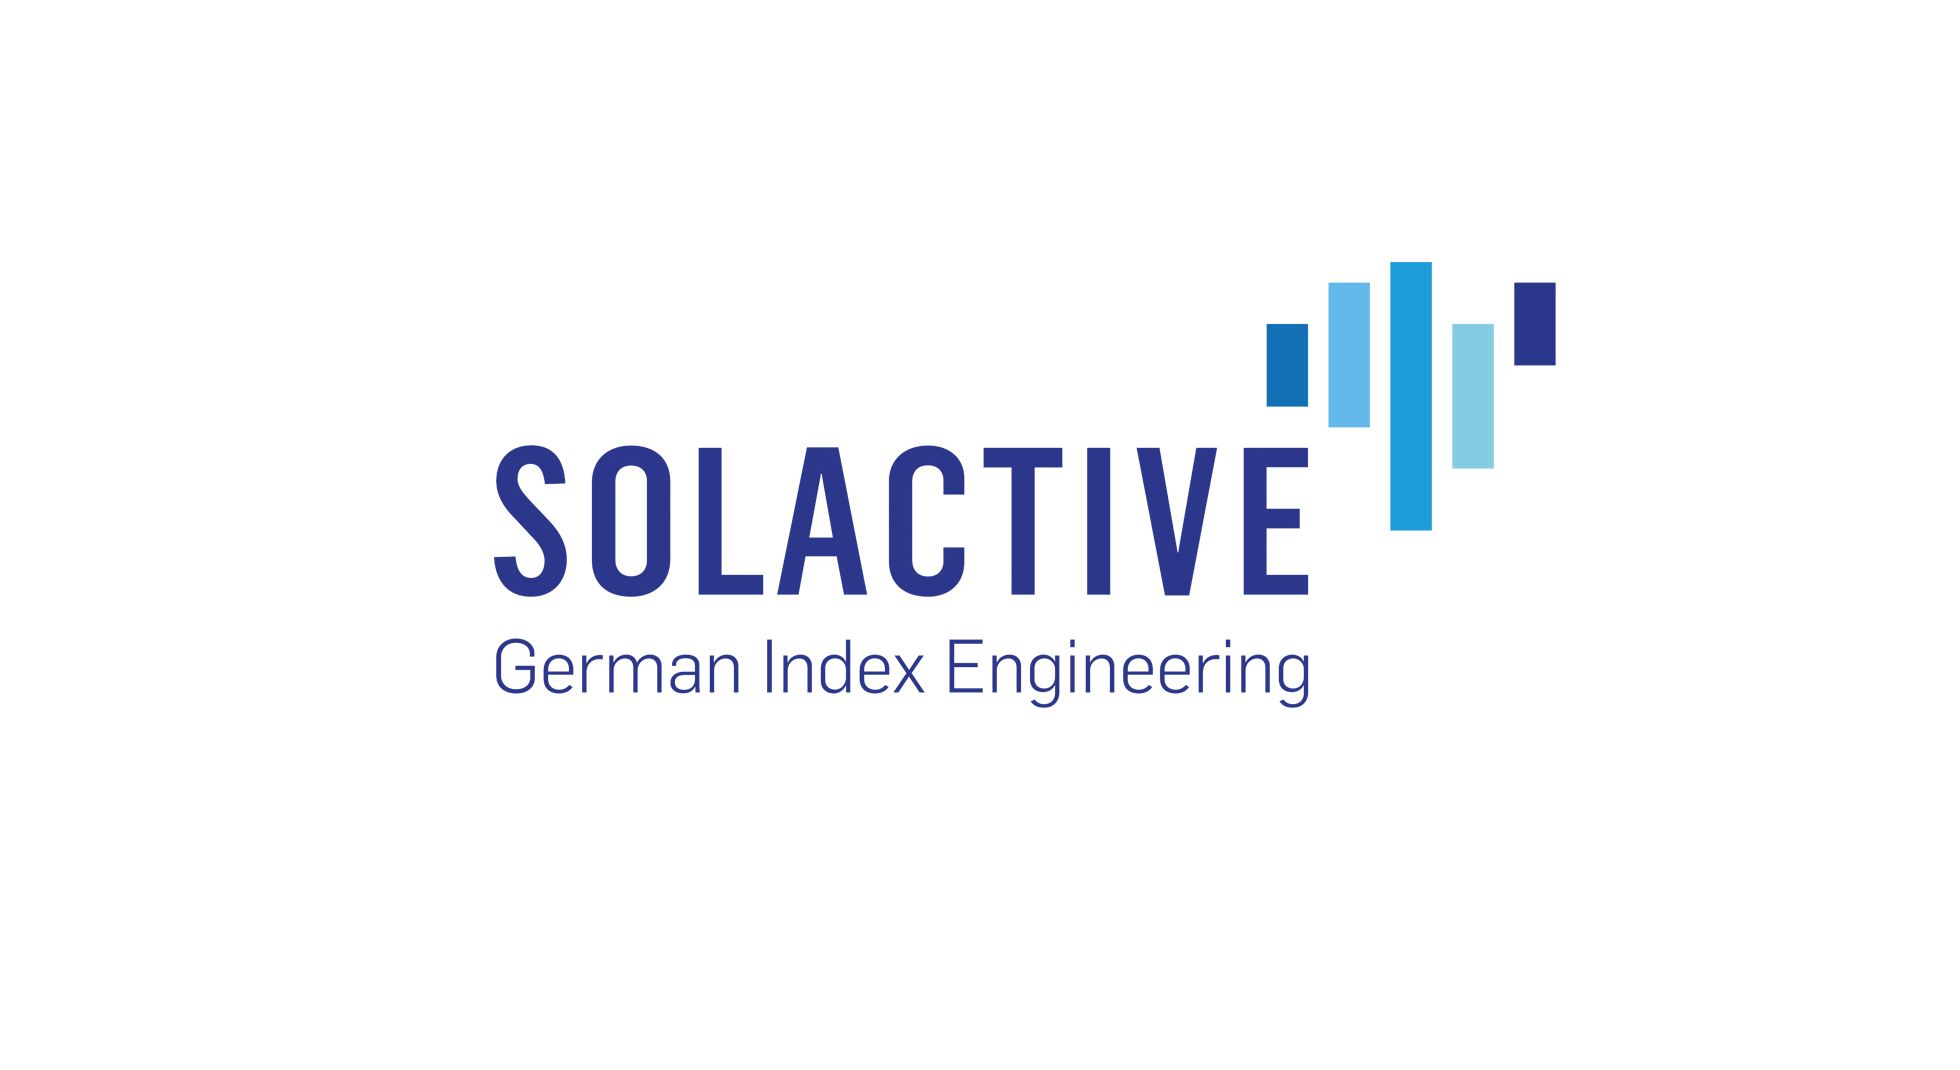 Press Release - Solactive Enters Japanese Market with its ETF Services Business